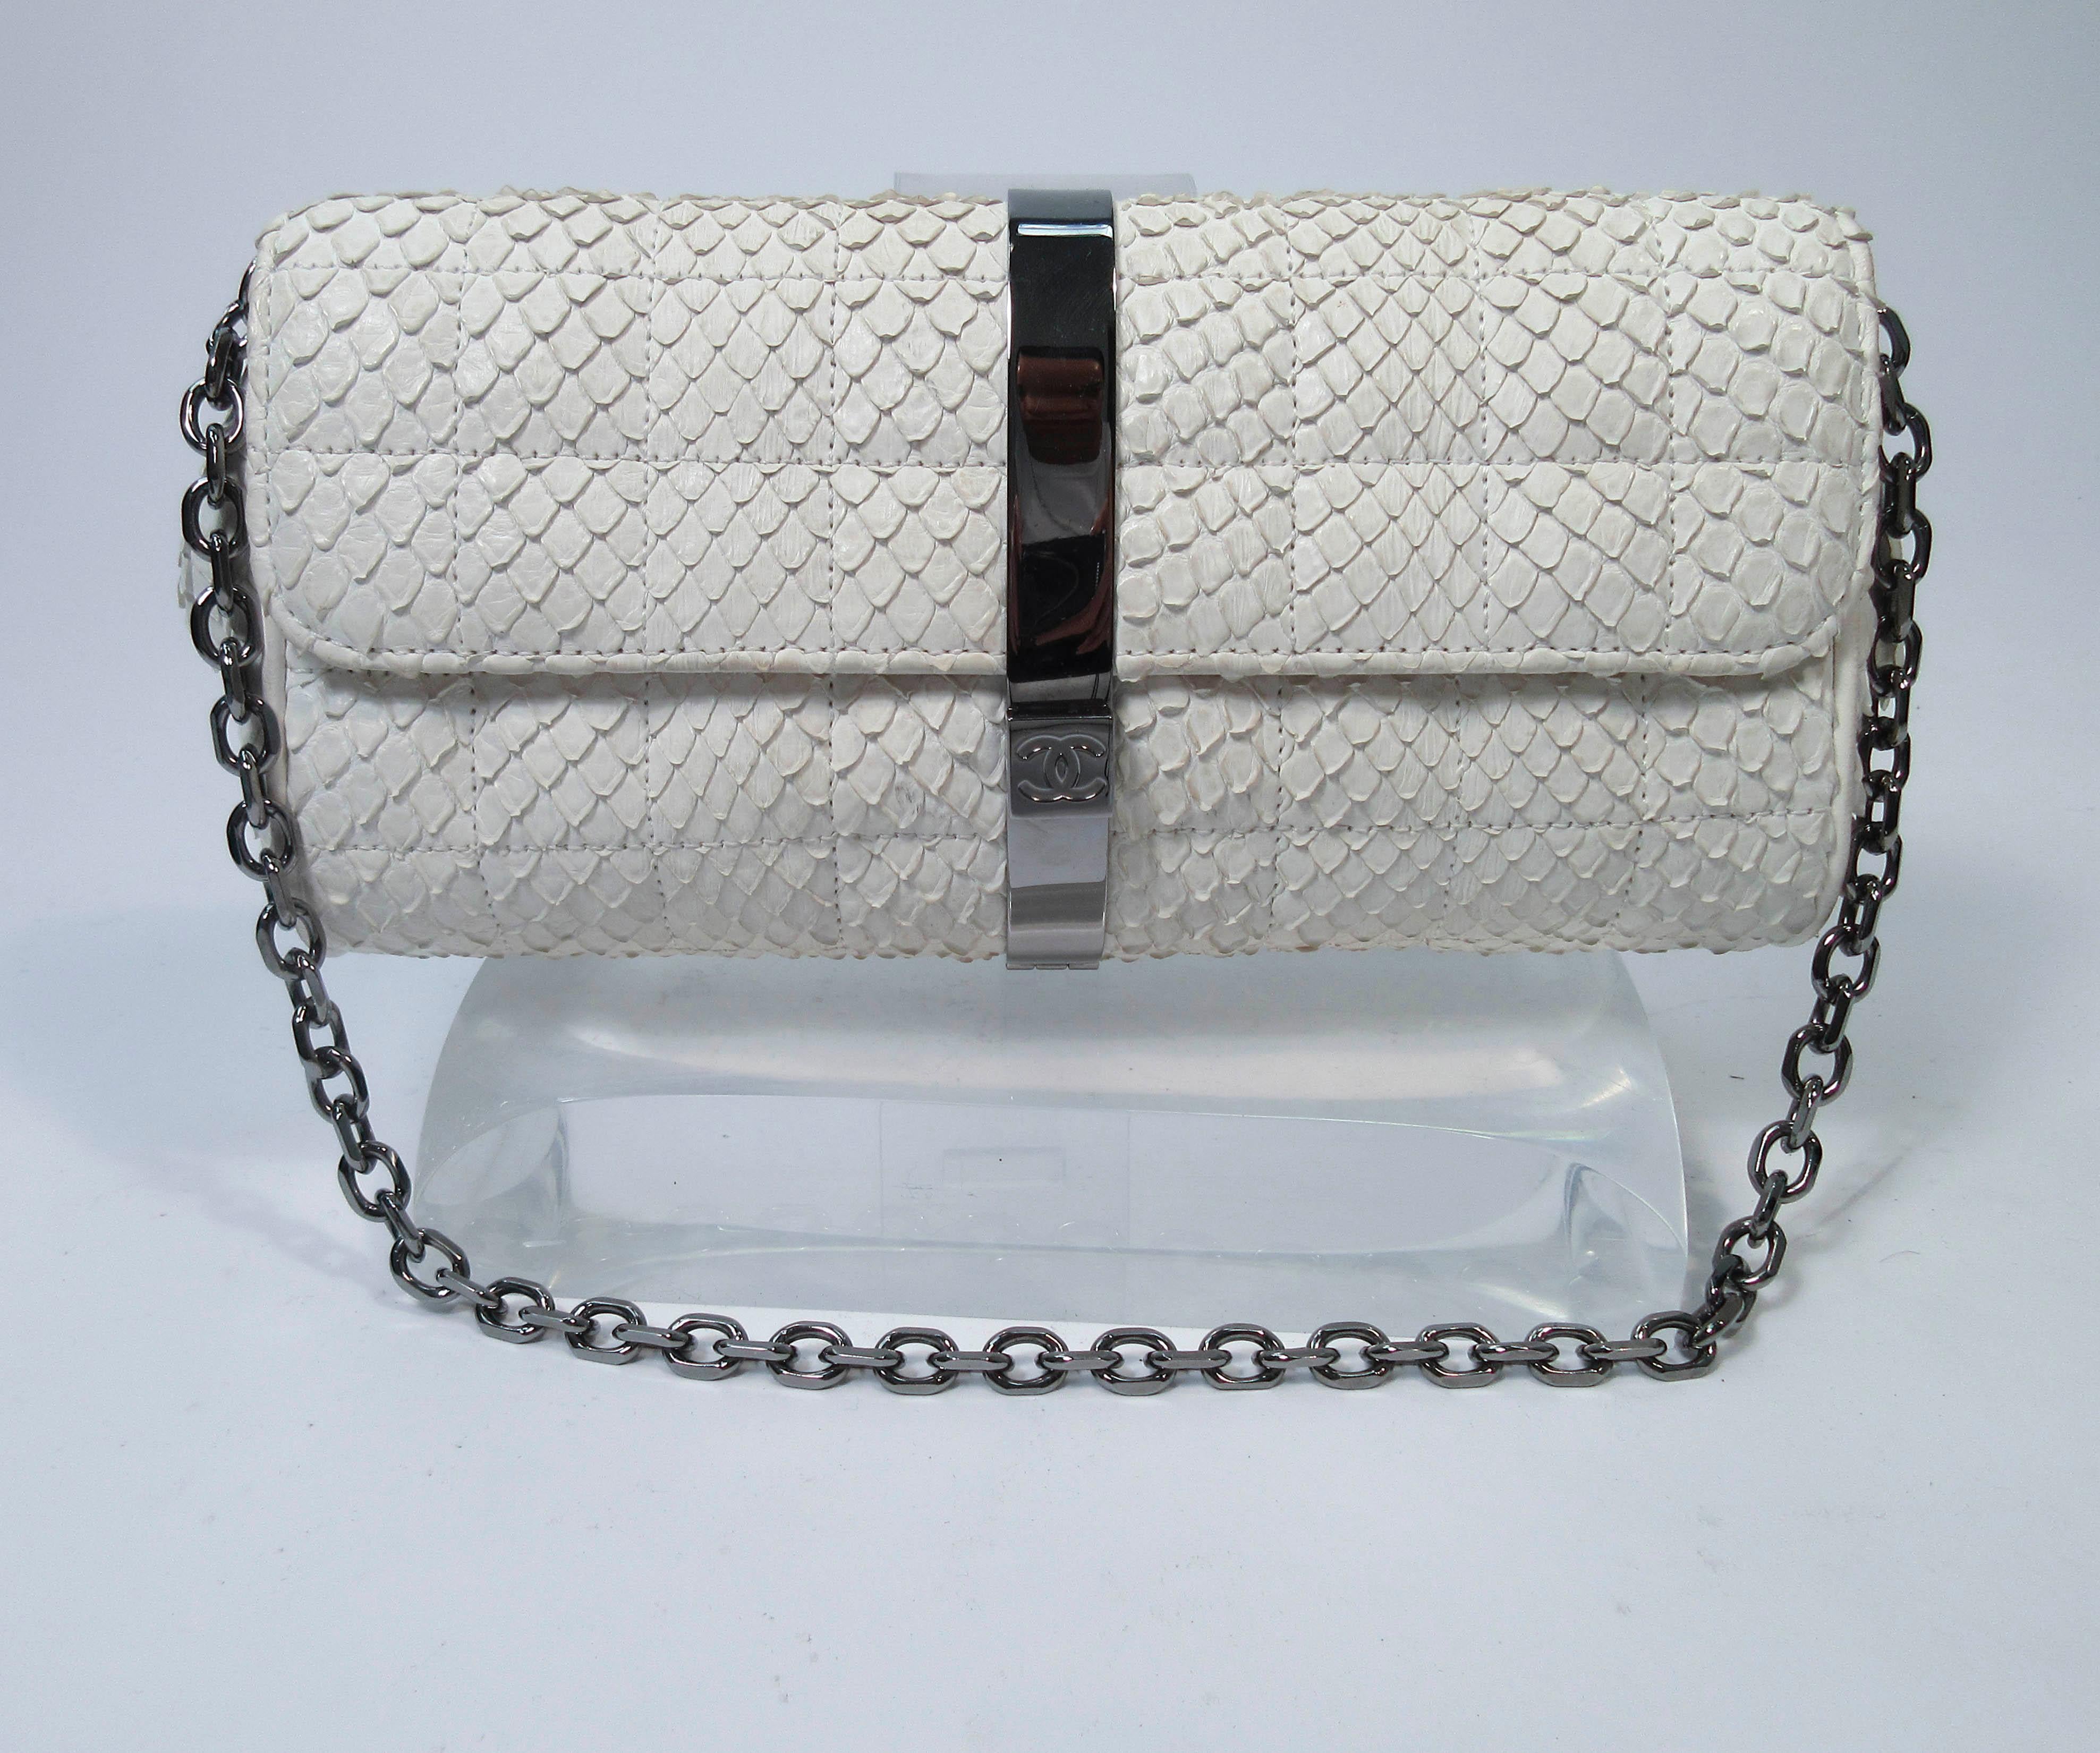 Chanel White Snakeskin Small Chain Clutch Purse with Silvertone Hardware 2